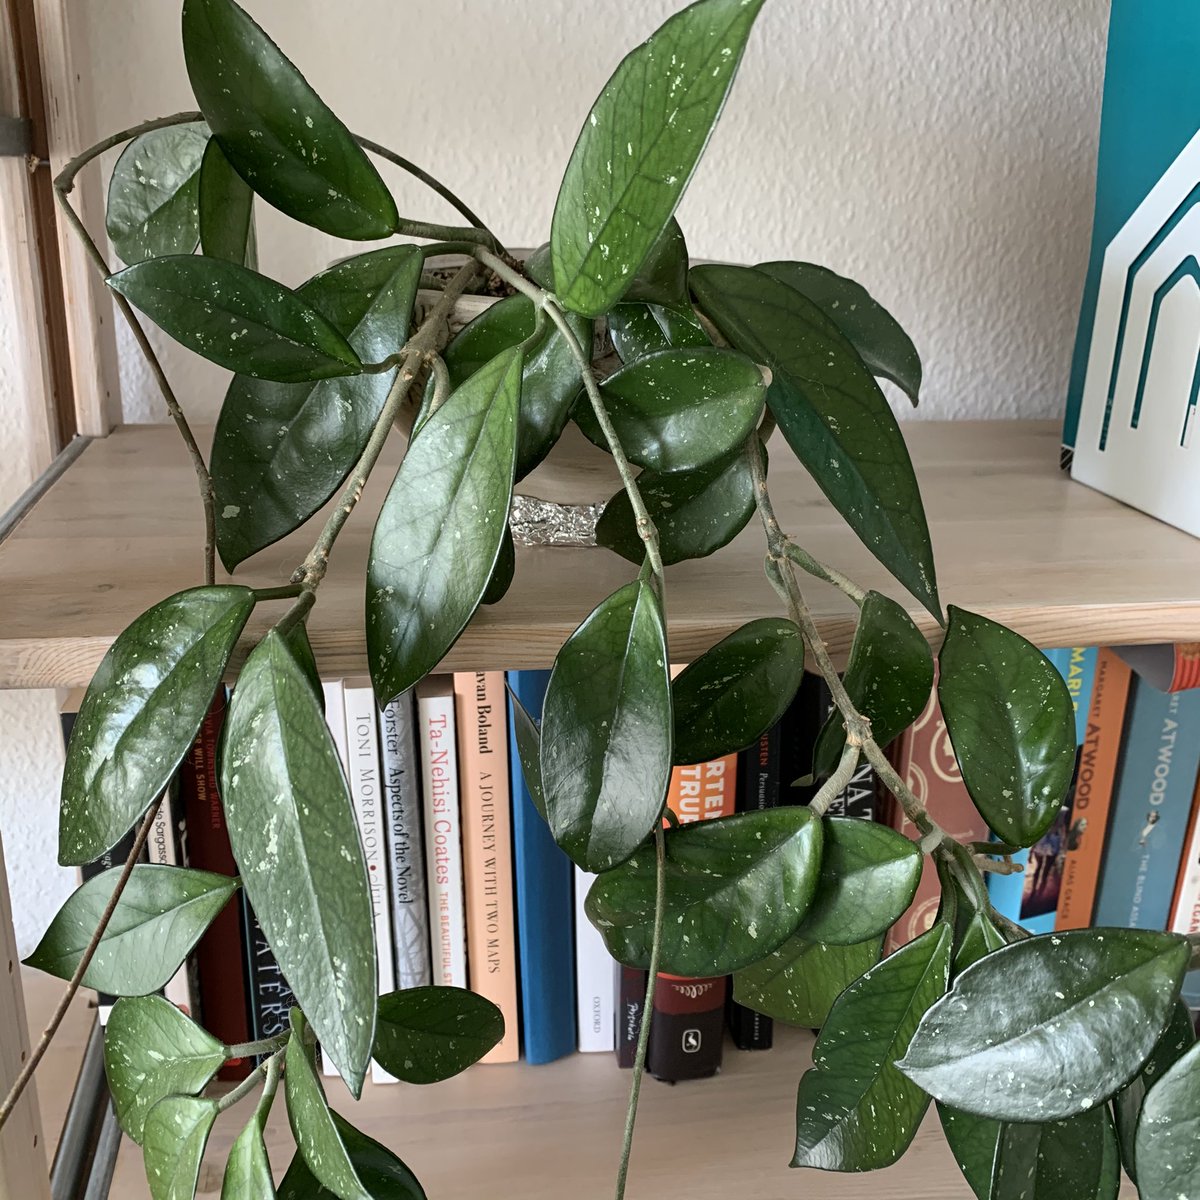 This is currently the only stephanotis I have, RIP my other one :’)